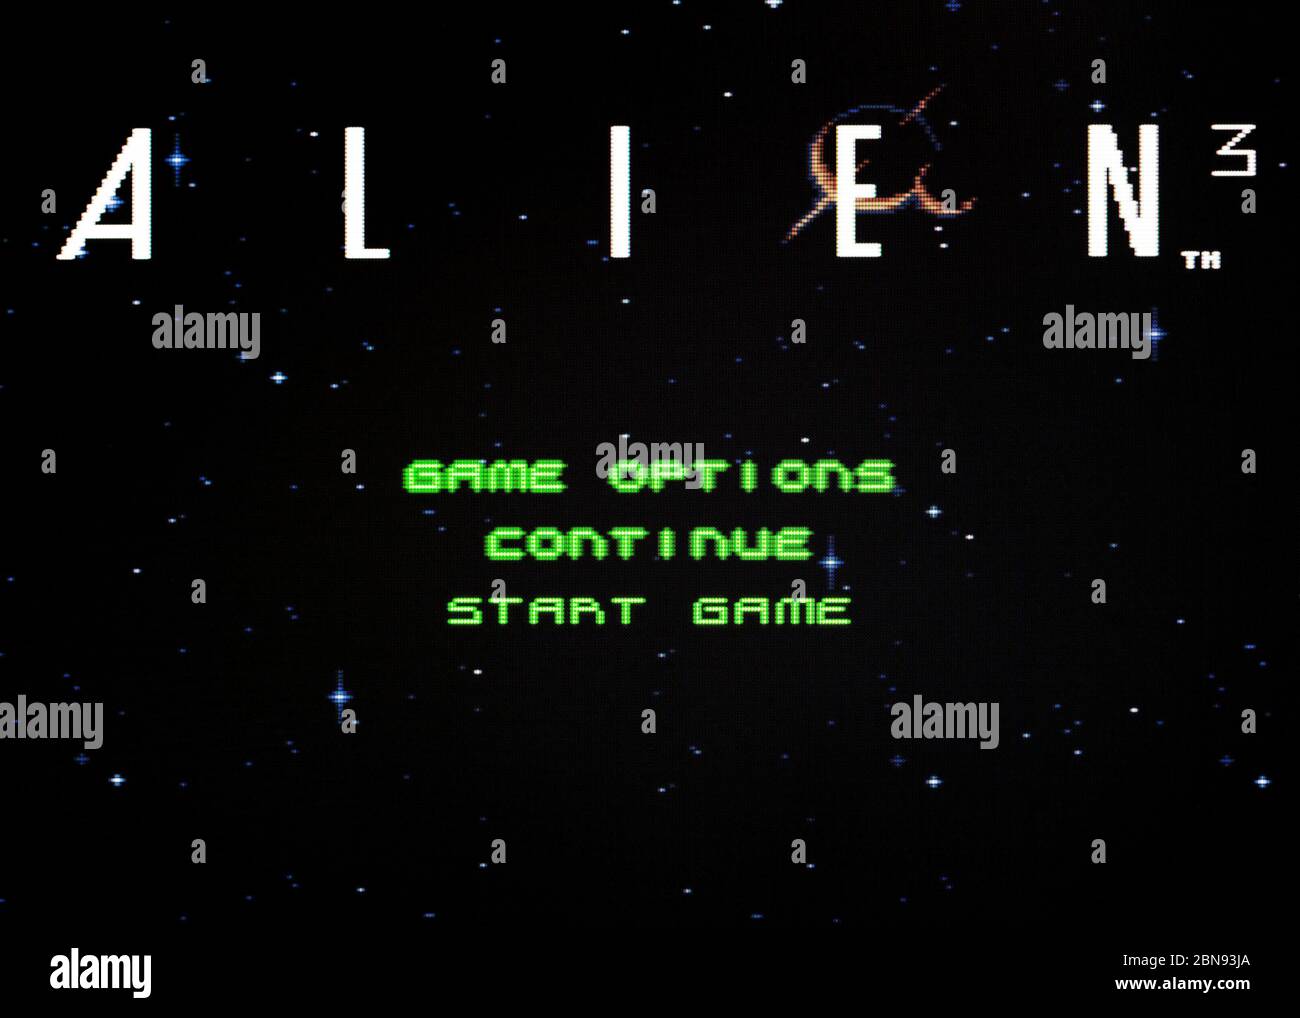 Alien 3 - SNES Super Nintendo - Editorial use only Stock Photo - Alamy